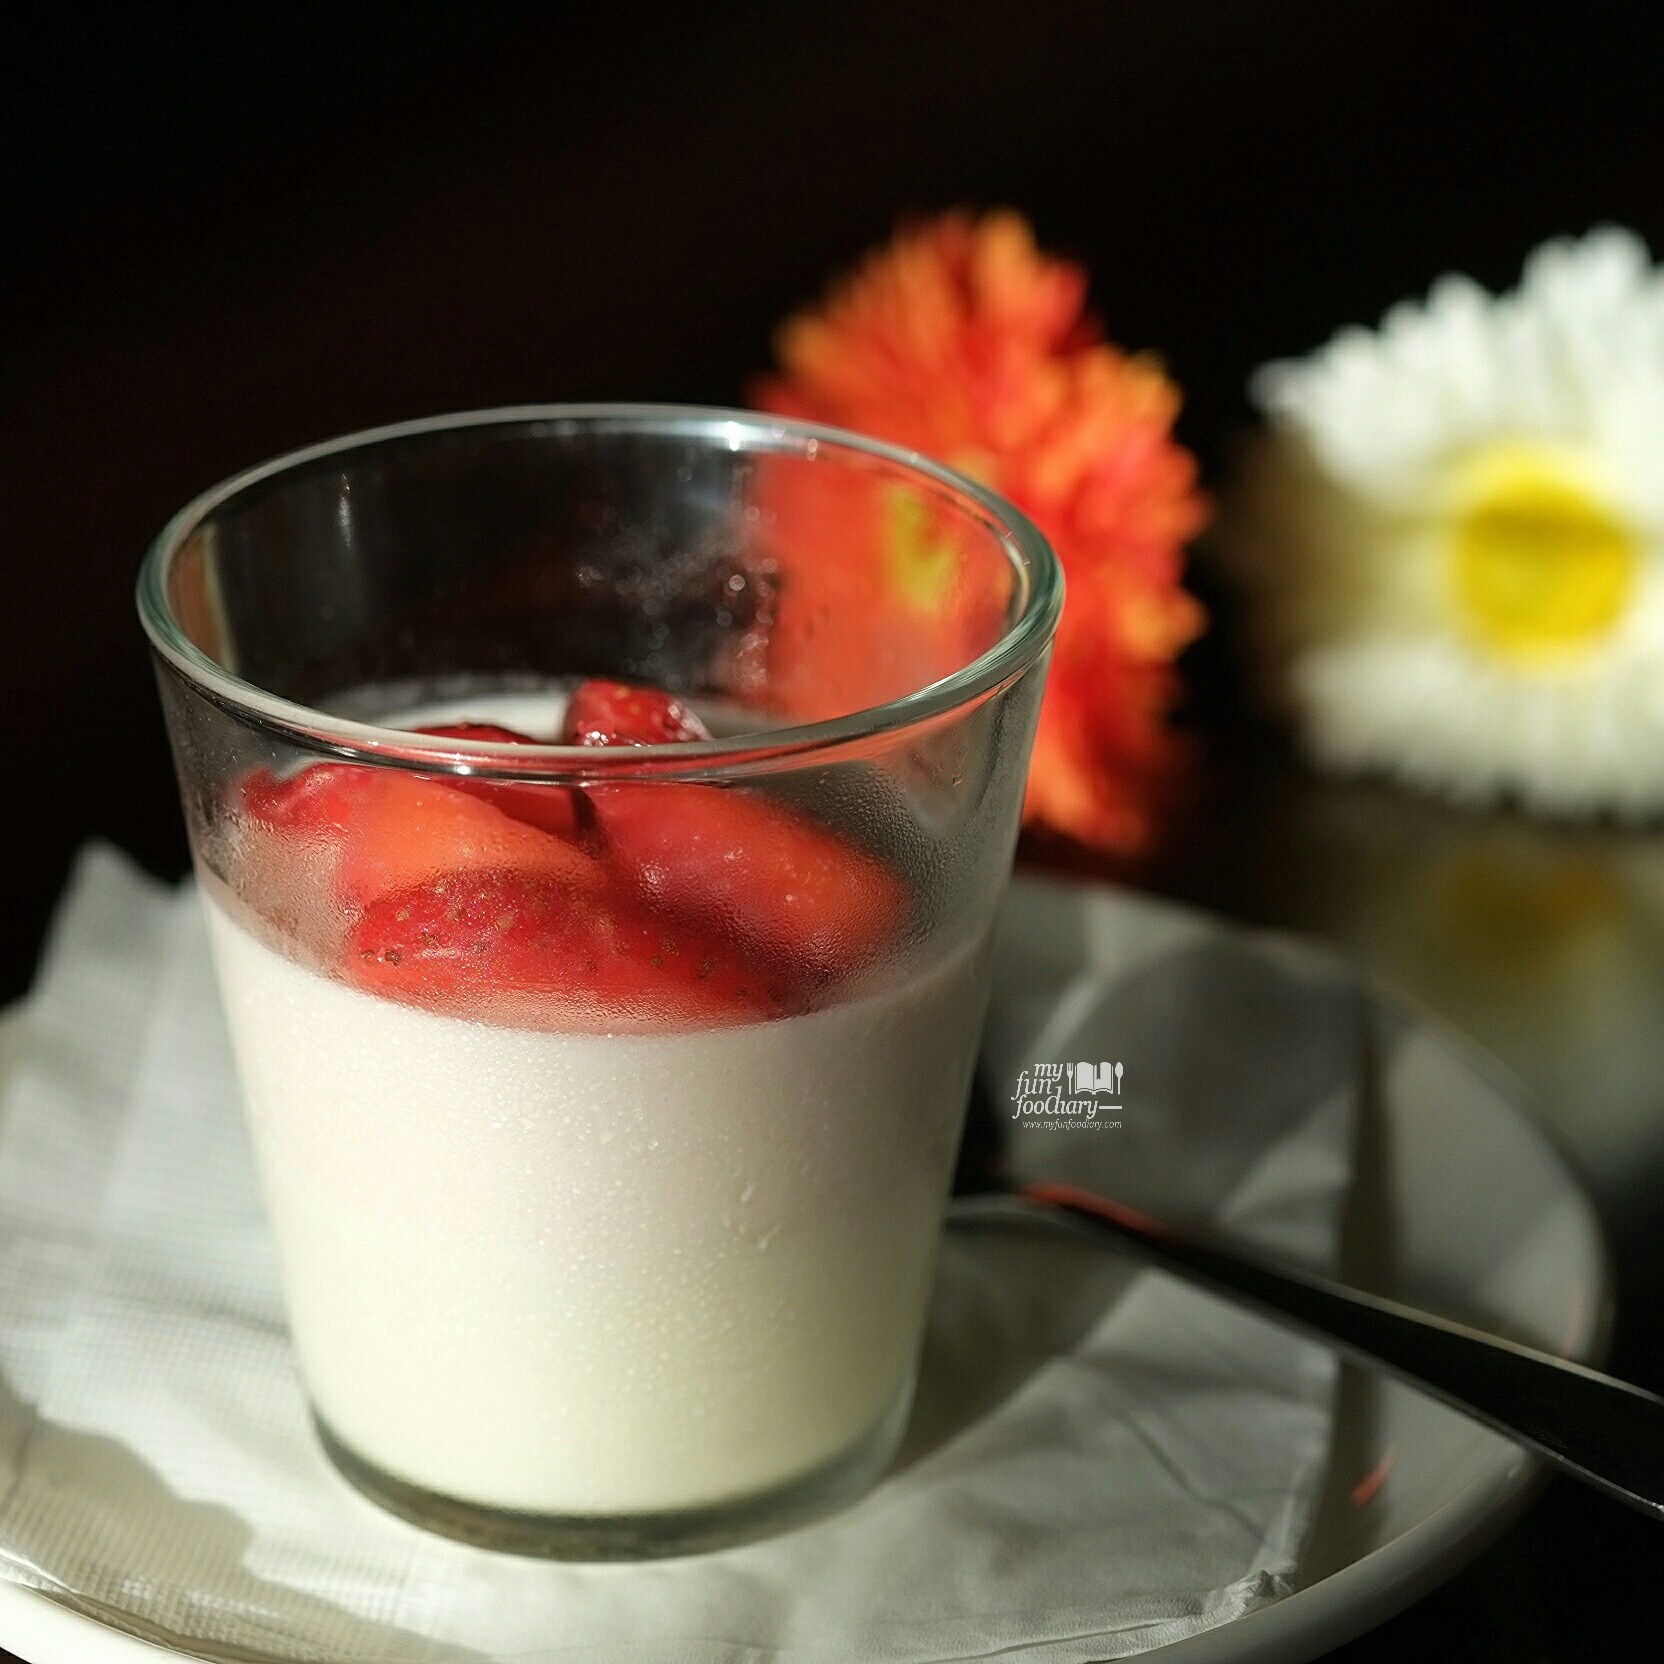 Strawberry Royal Creme at Gauden Cafe and Bar by Myfunfoodiary 01